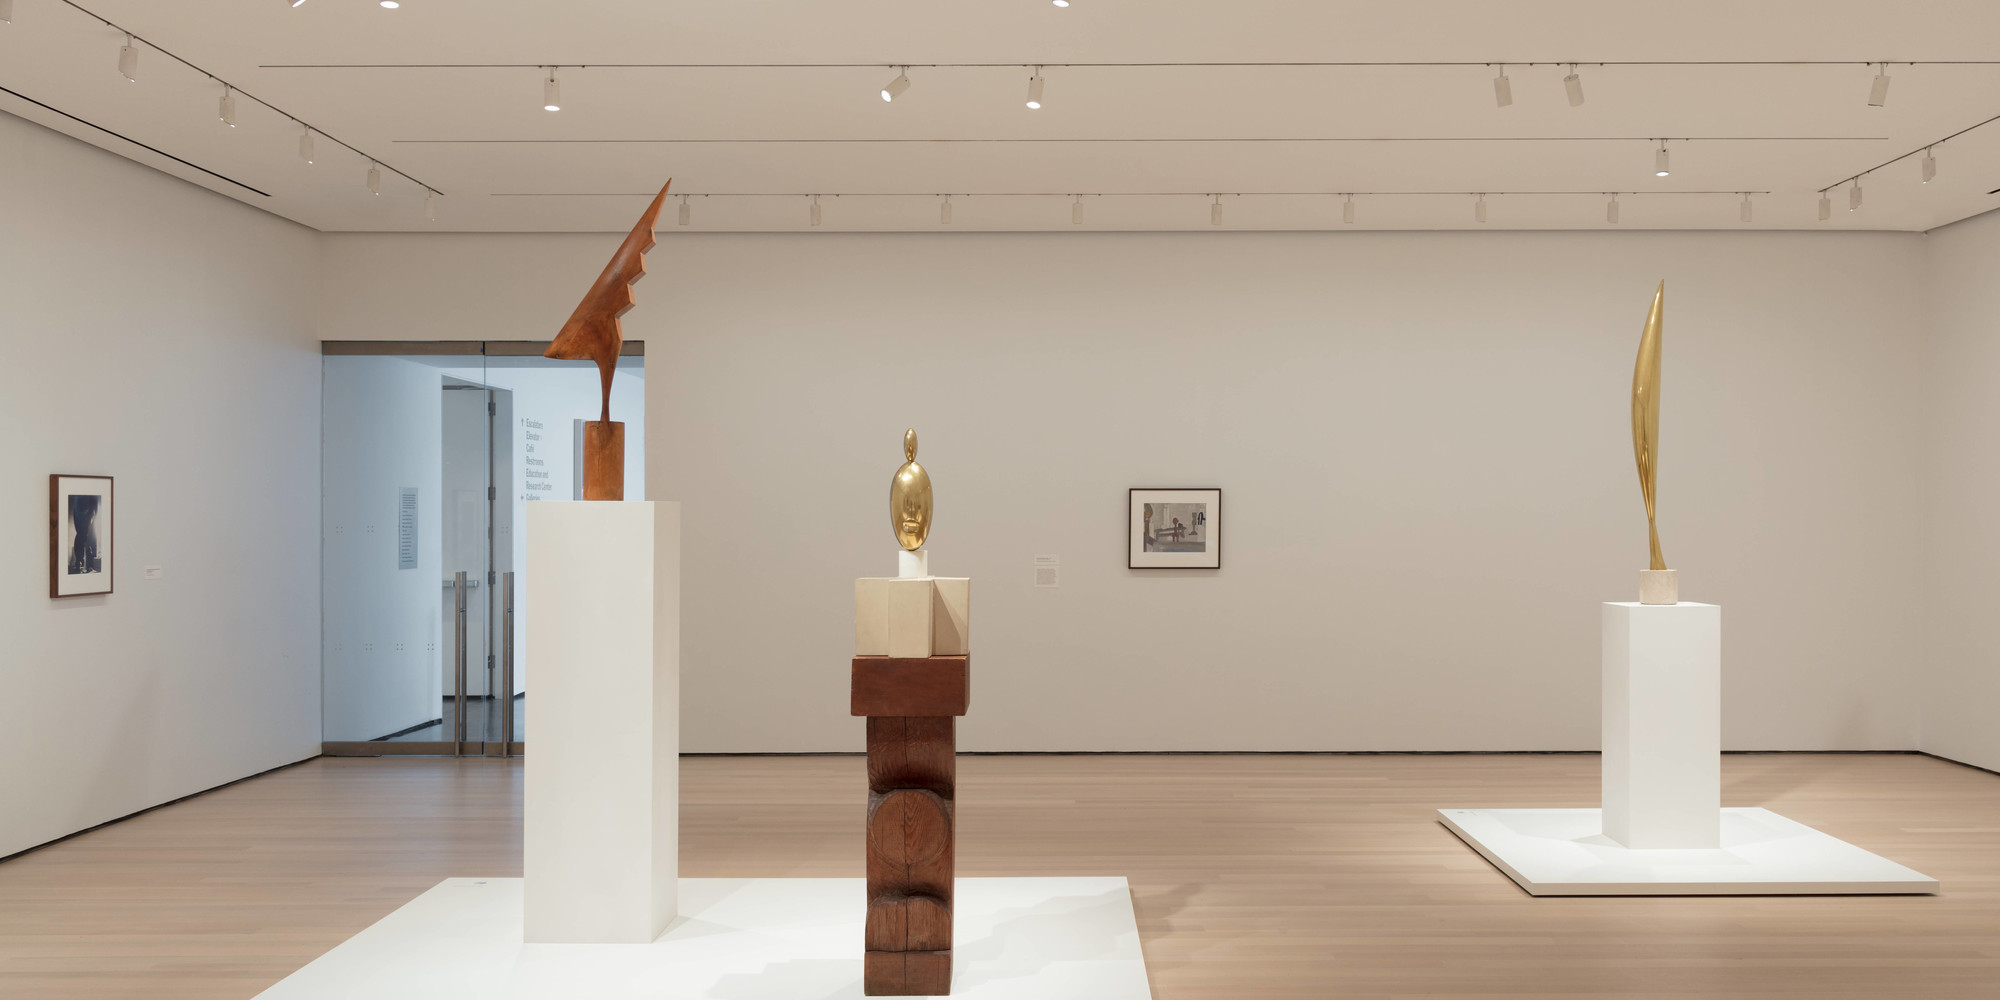 Installation view of the exhibition Constantin Brâncuși Sculpture, The Museum of Modern Art, July 22, 2018–June 15, 2019. Photo: Denis Doorly. © 2019 The Museum of Modern Art, New York